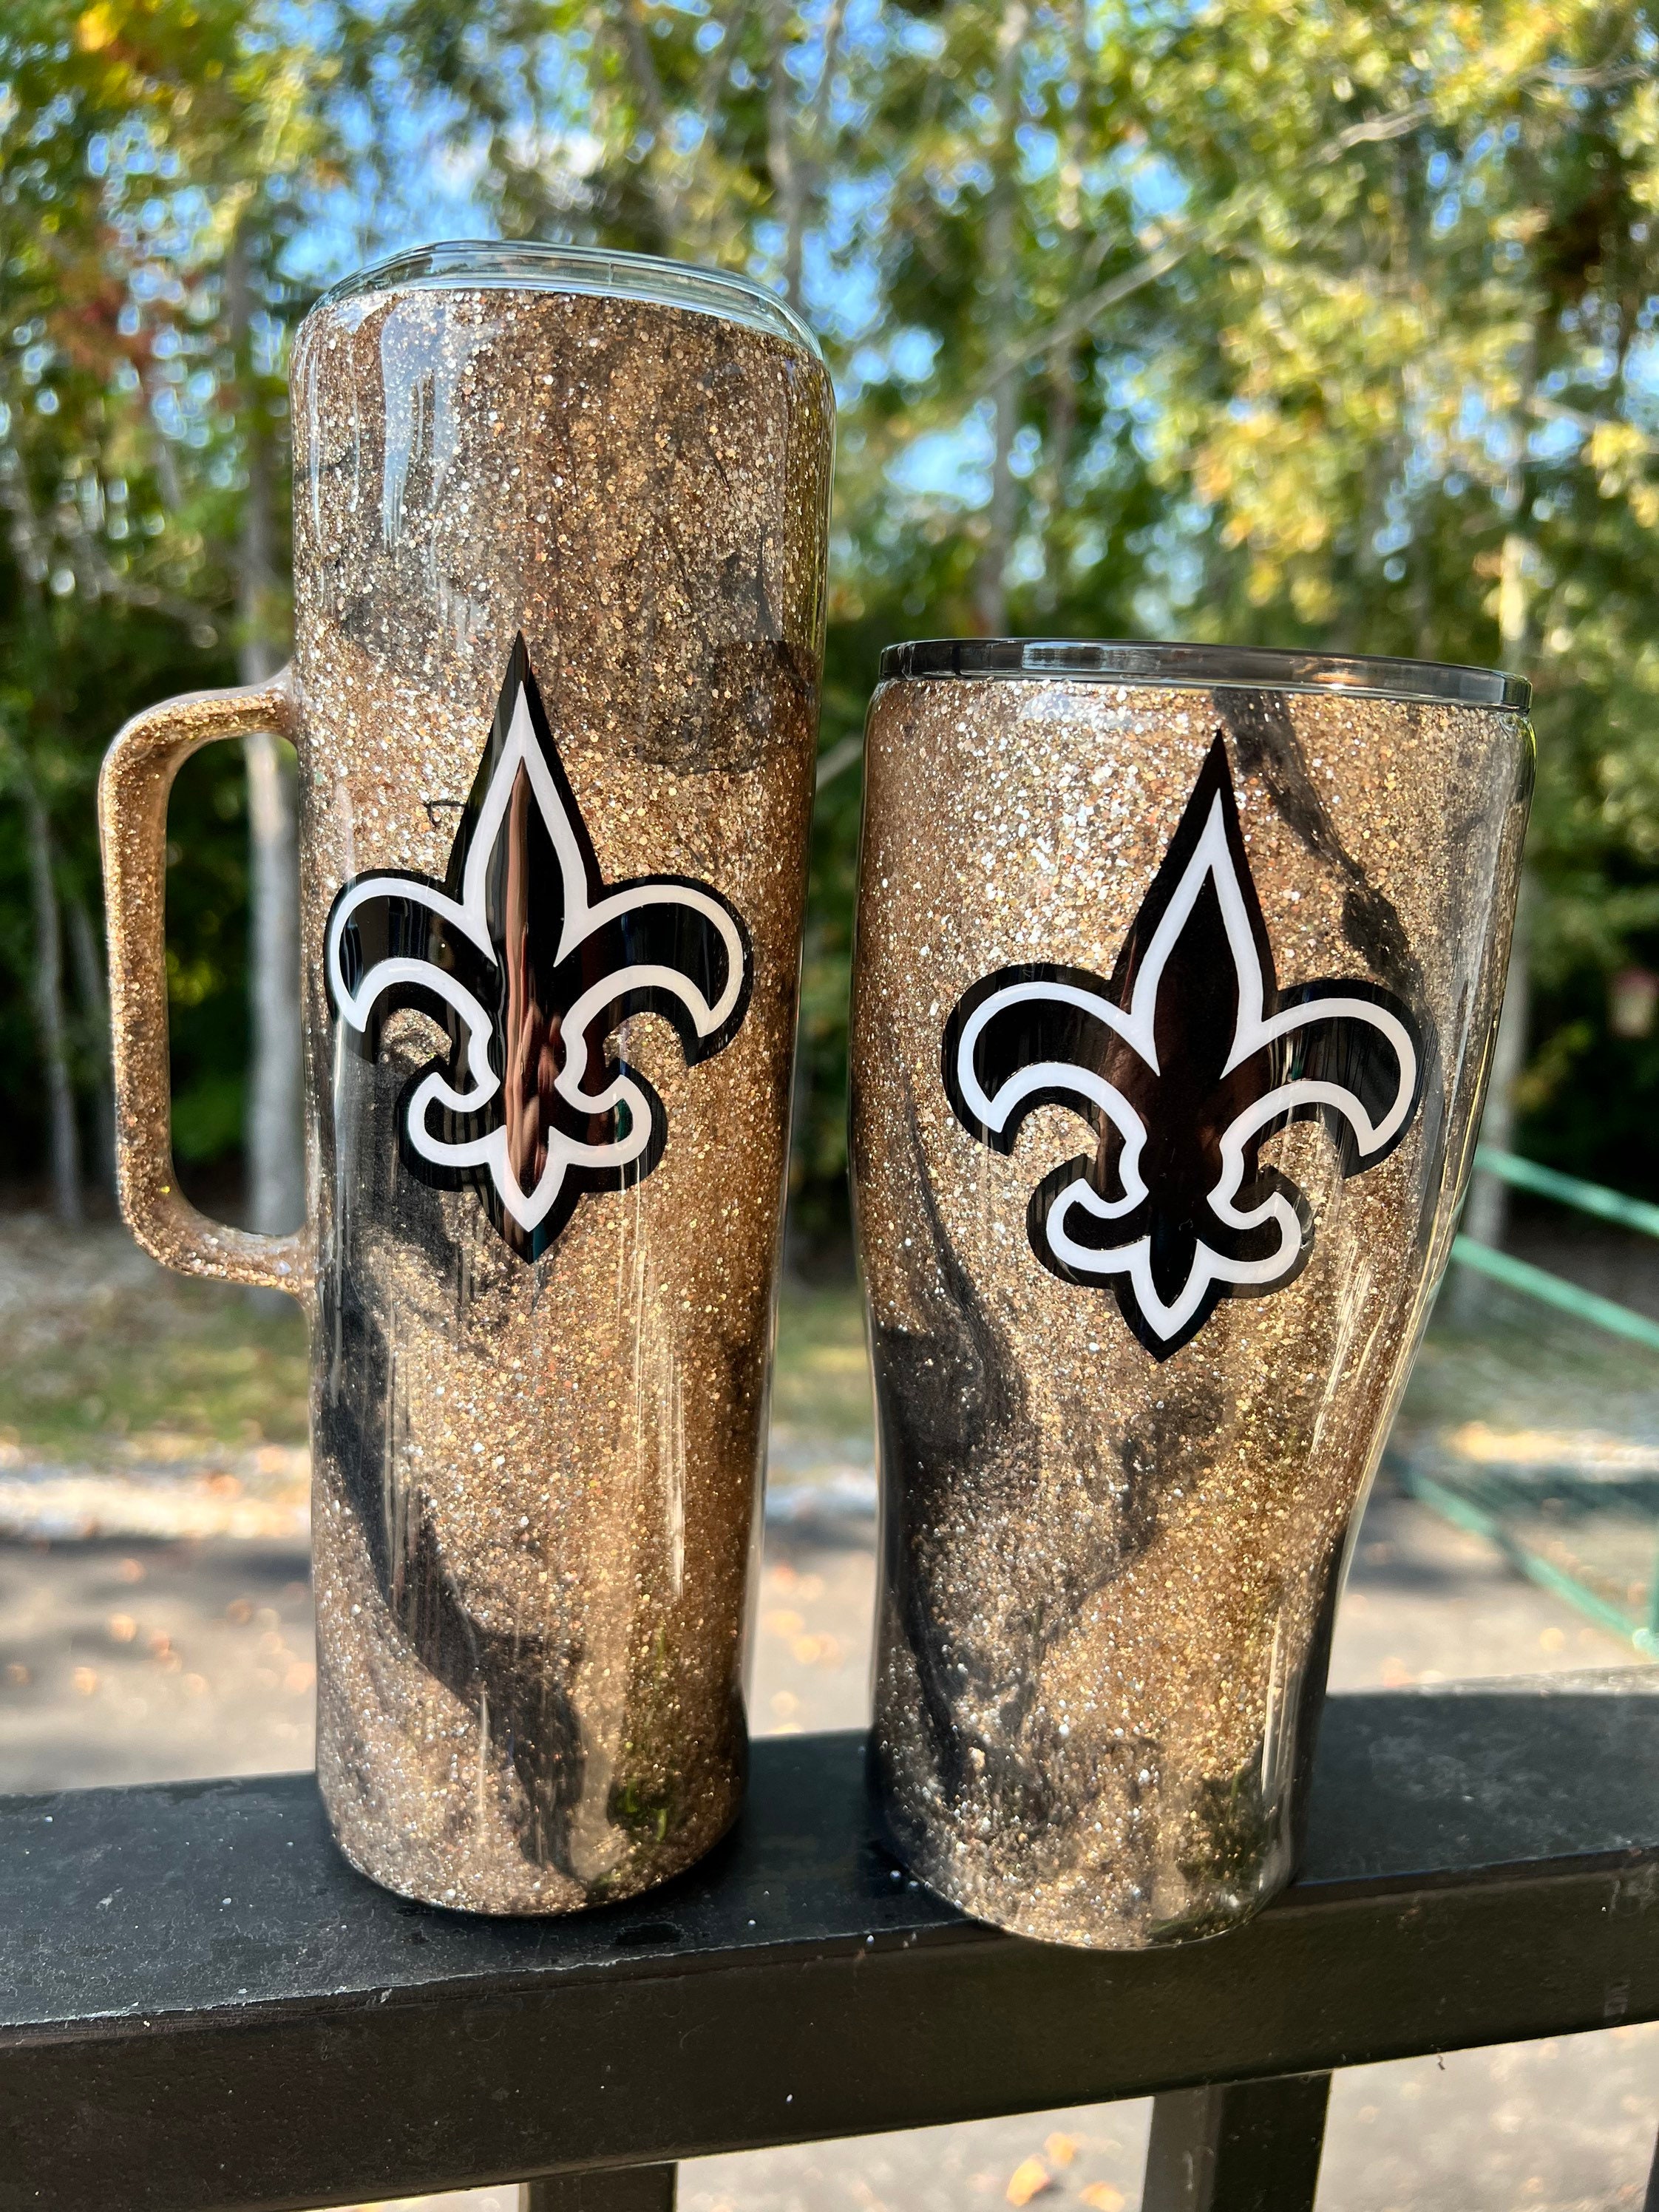 I Am Groot New Orleans Saints NFL Tumbler – Trending Personalized